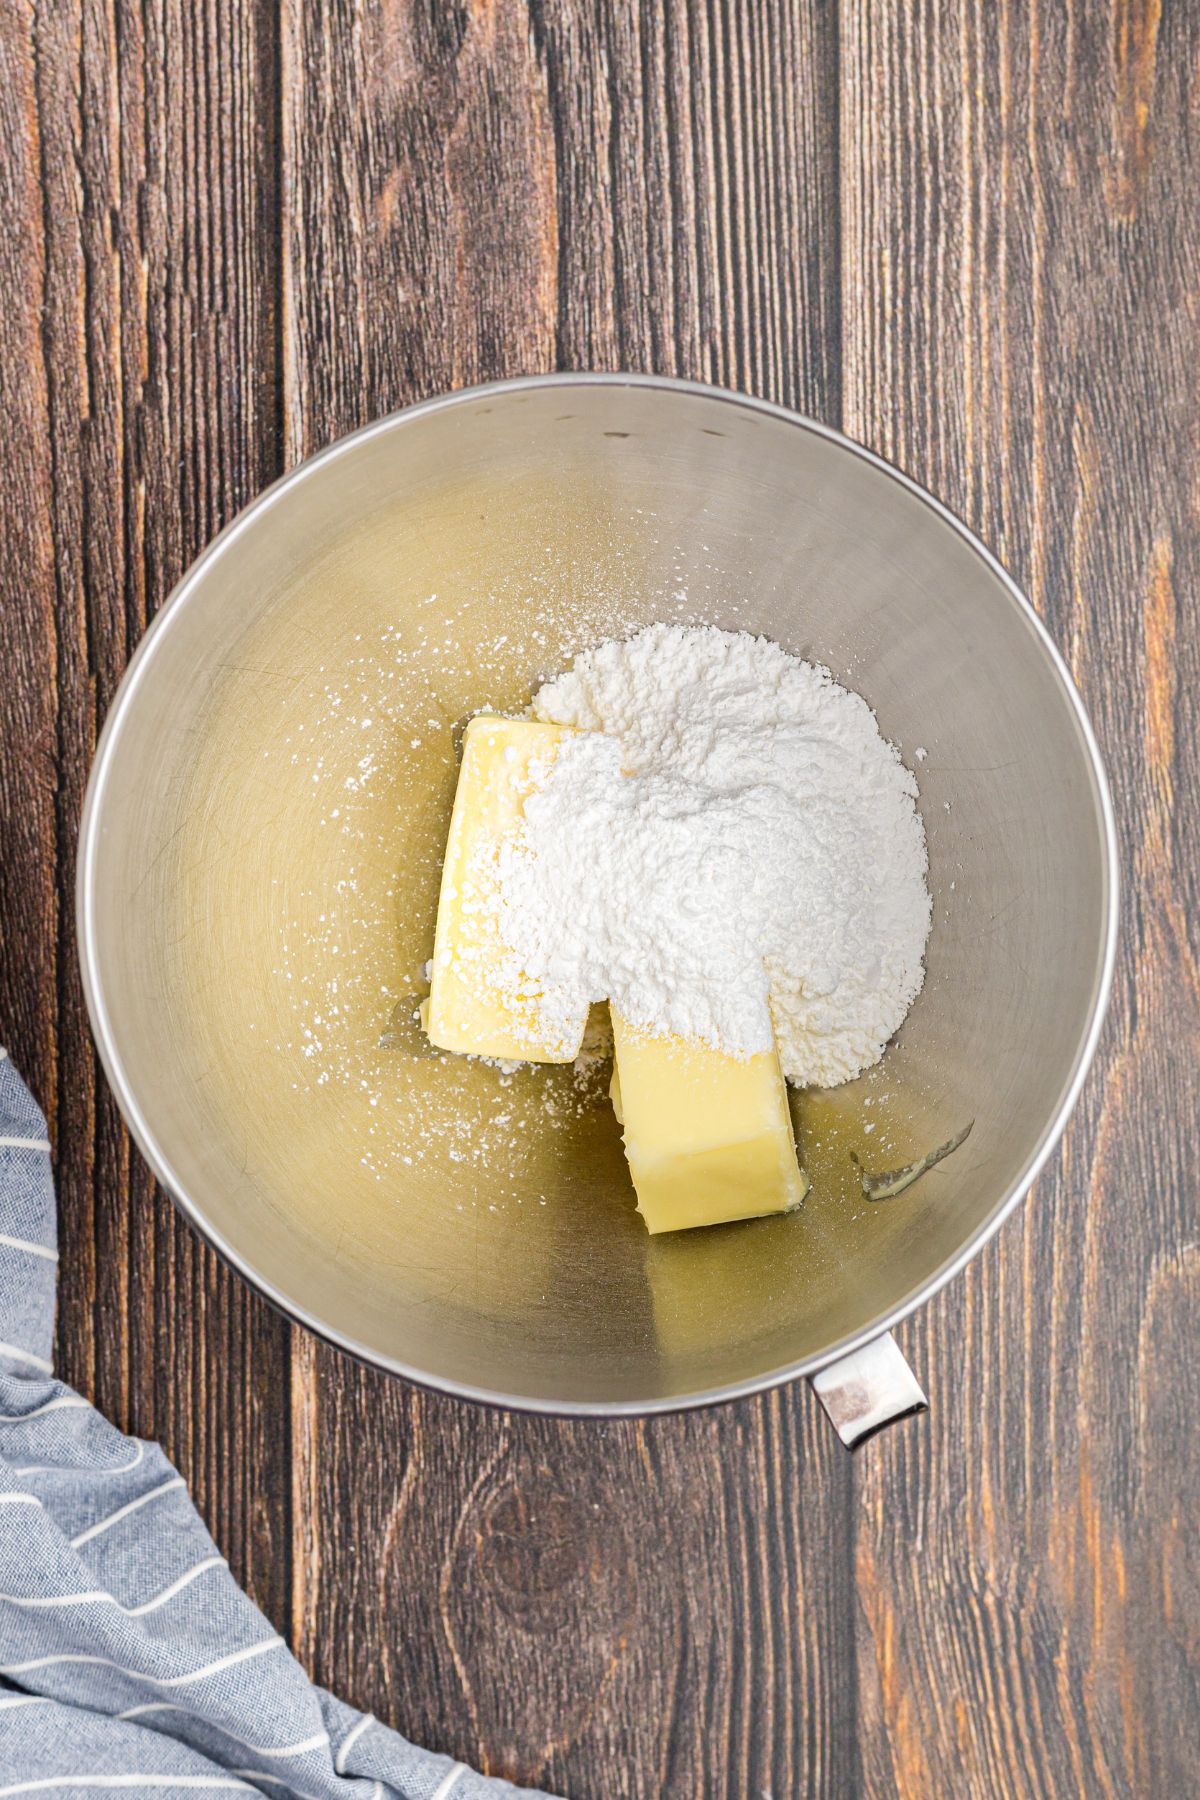 Butter and powdered sugar being mixed together in a bowl